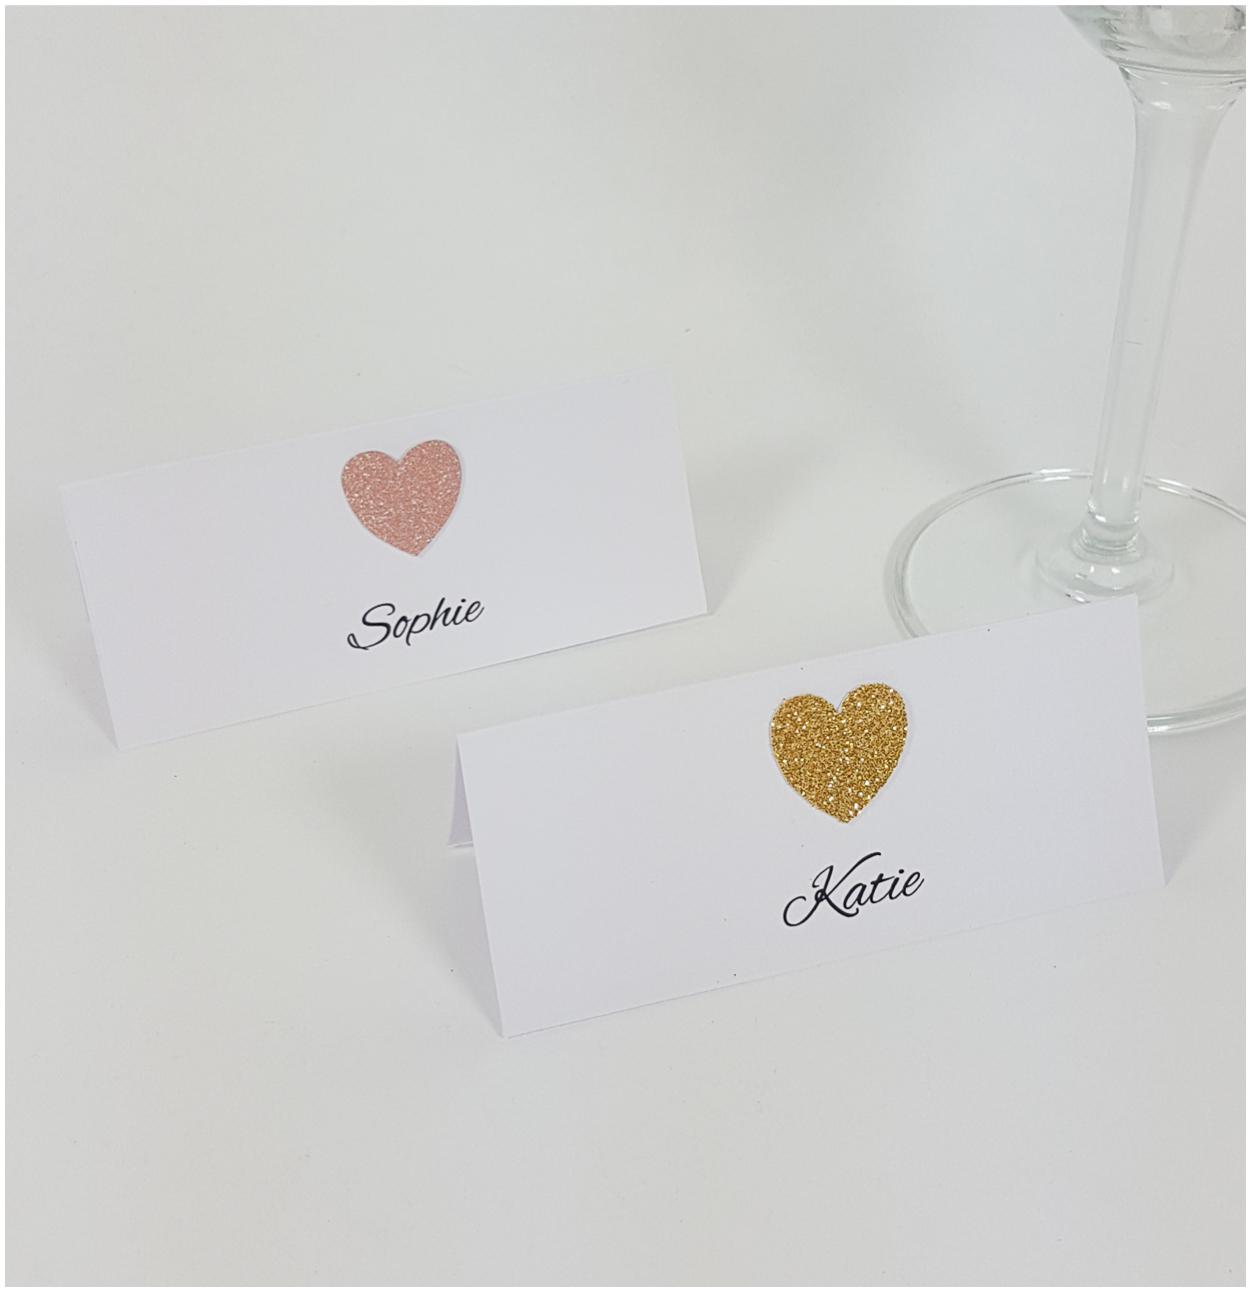 blank name place cards